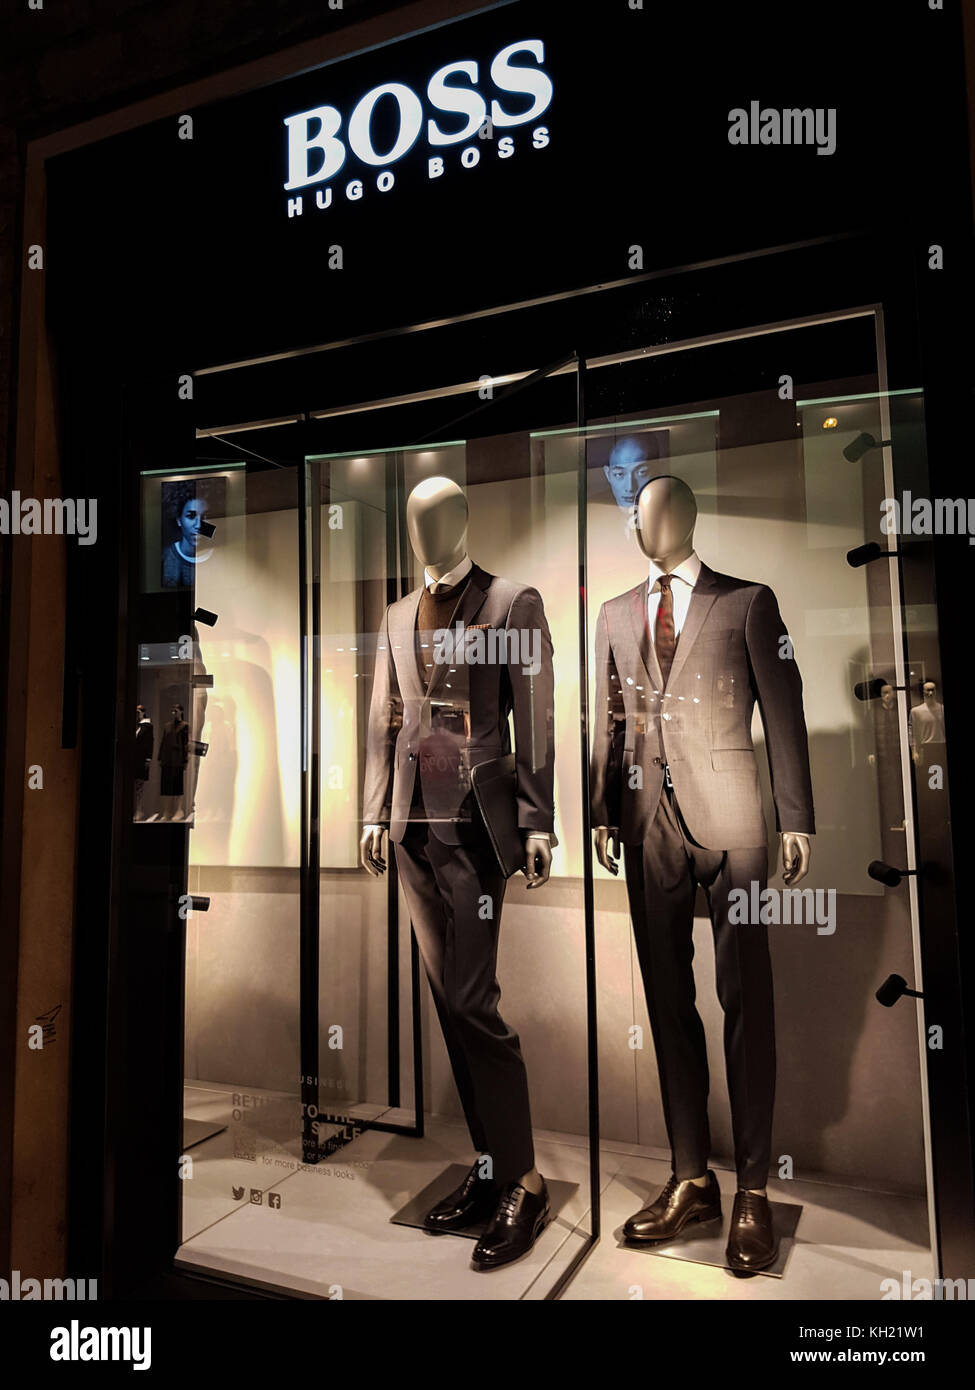 Hugo Boss shop in Florence, Italy Stock Photo - Alamy